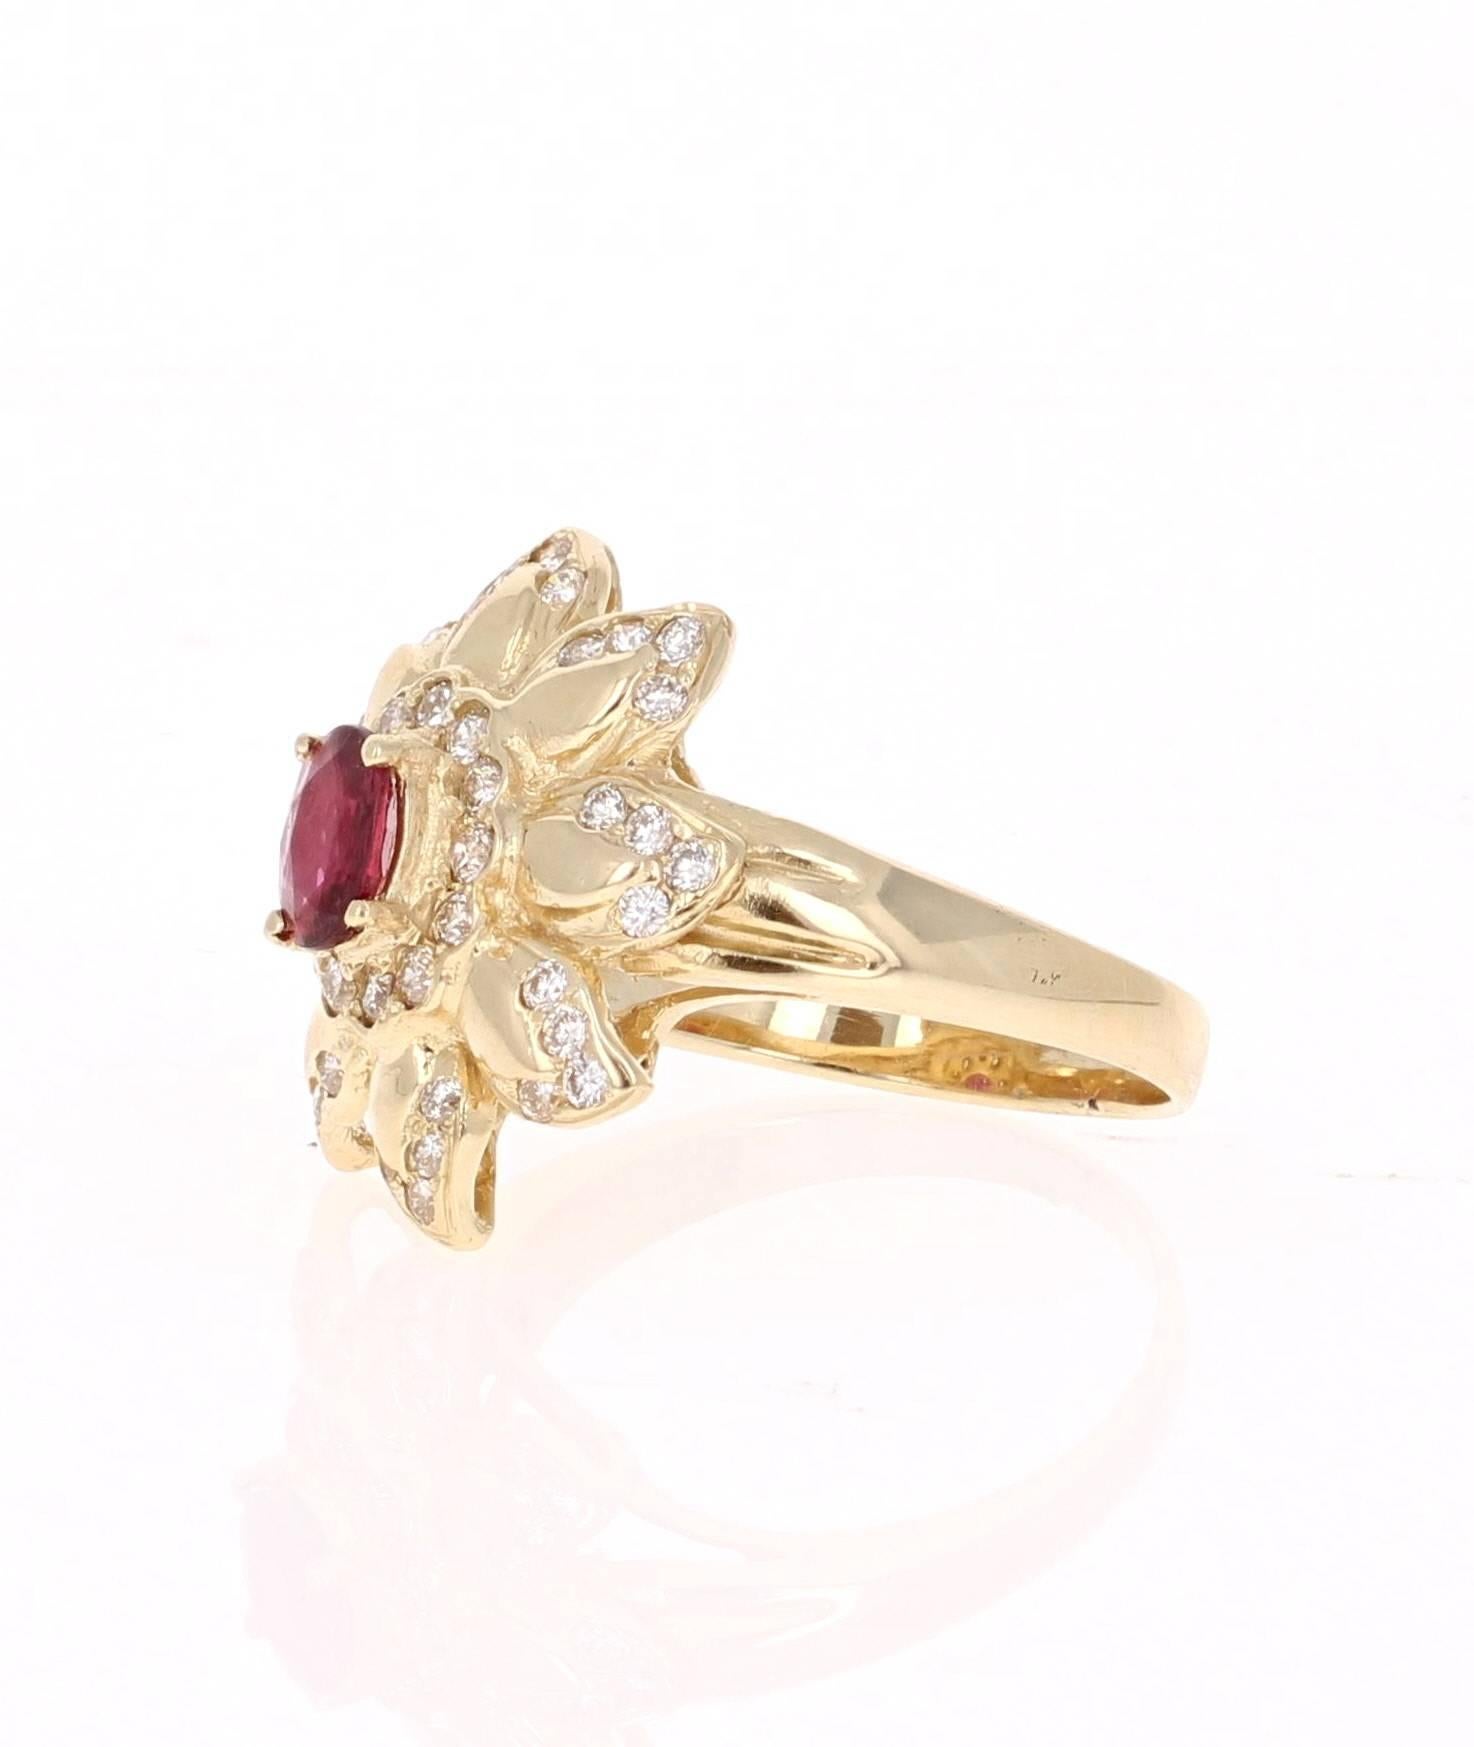 This ring is truly a beauty! 
There is an Oval Cut Burmese Ruby set in the center of the ring that weighs 0.58 carat.  The measurements of the Ruby are 5mm x 6mm. There are also 44 Round Cut Diamonds that weigh 0.62 carat.  The total carat weight of